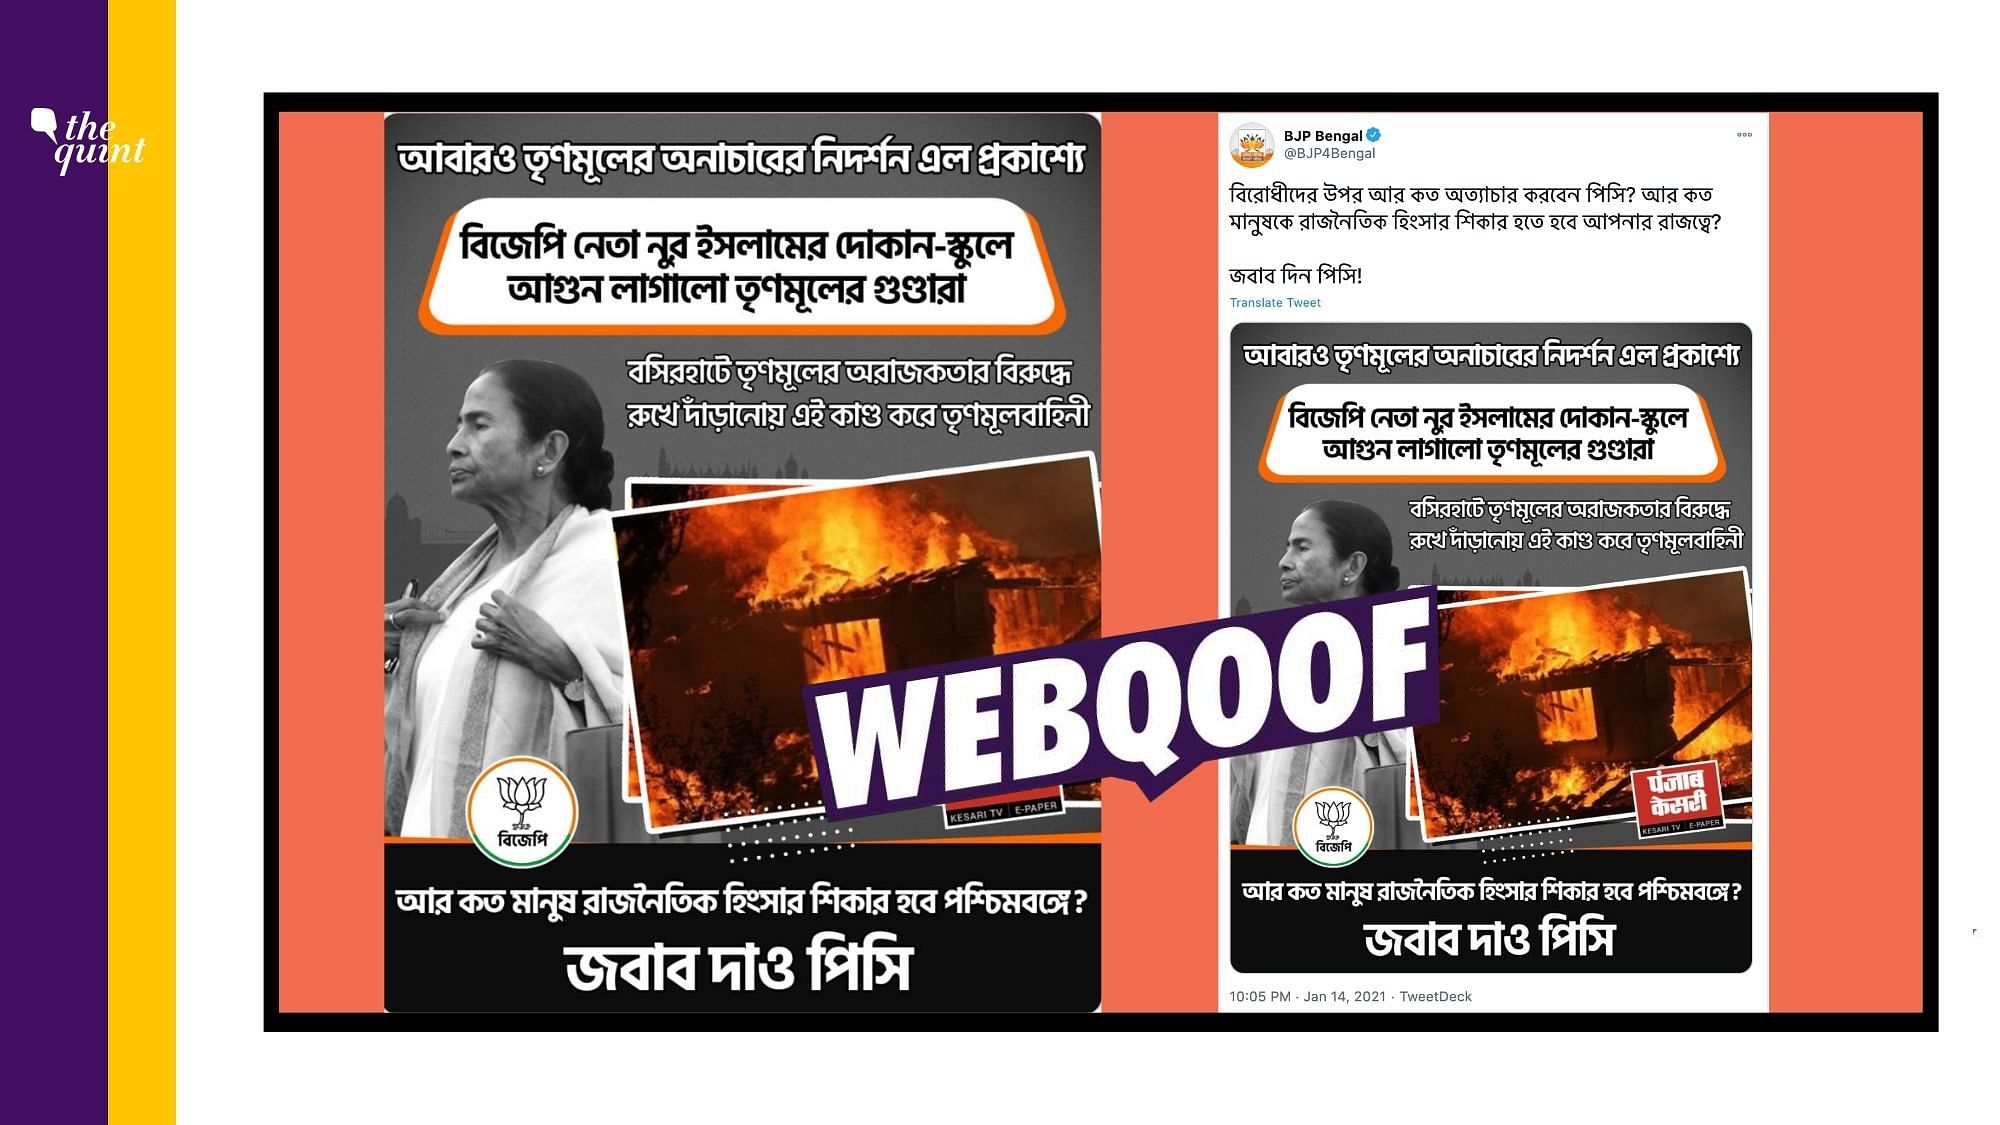 A seven-year-old photo from California was shared by BJP handles and was falsely linked to West Bengal.